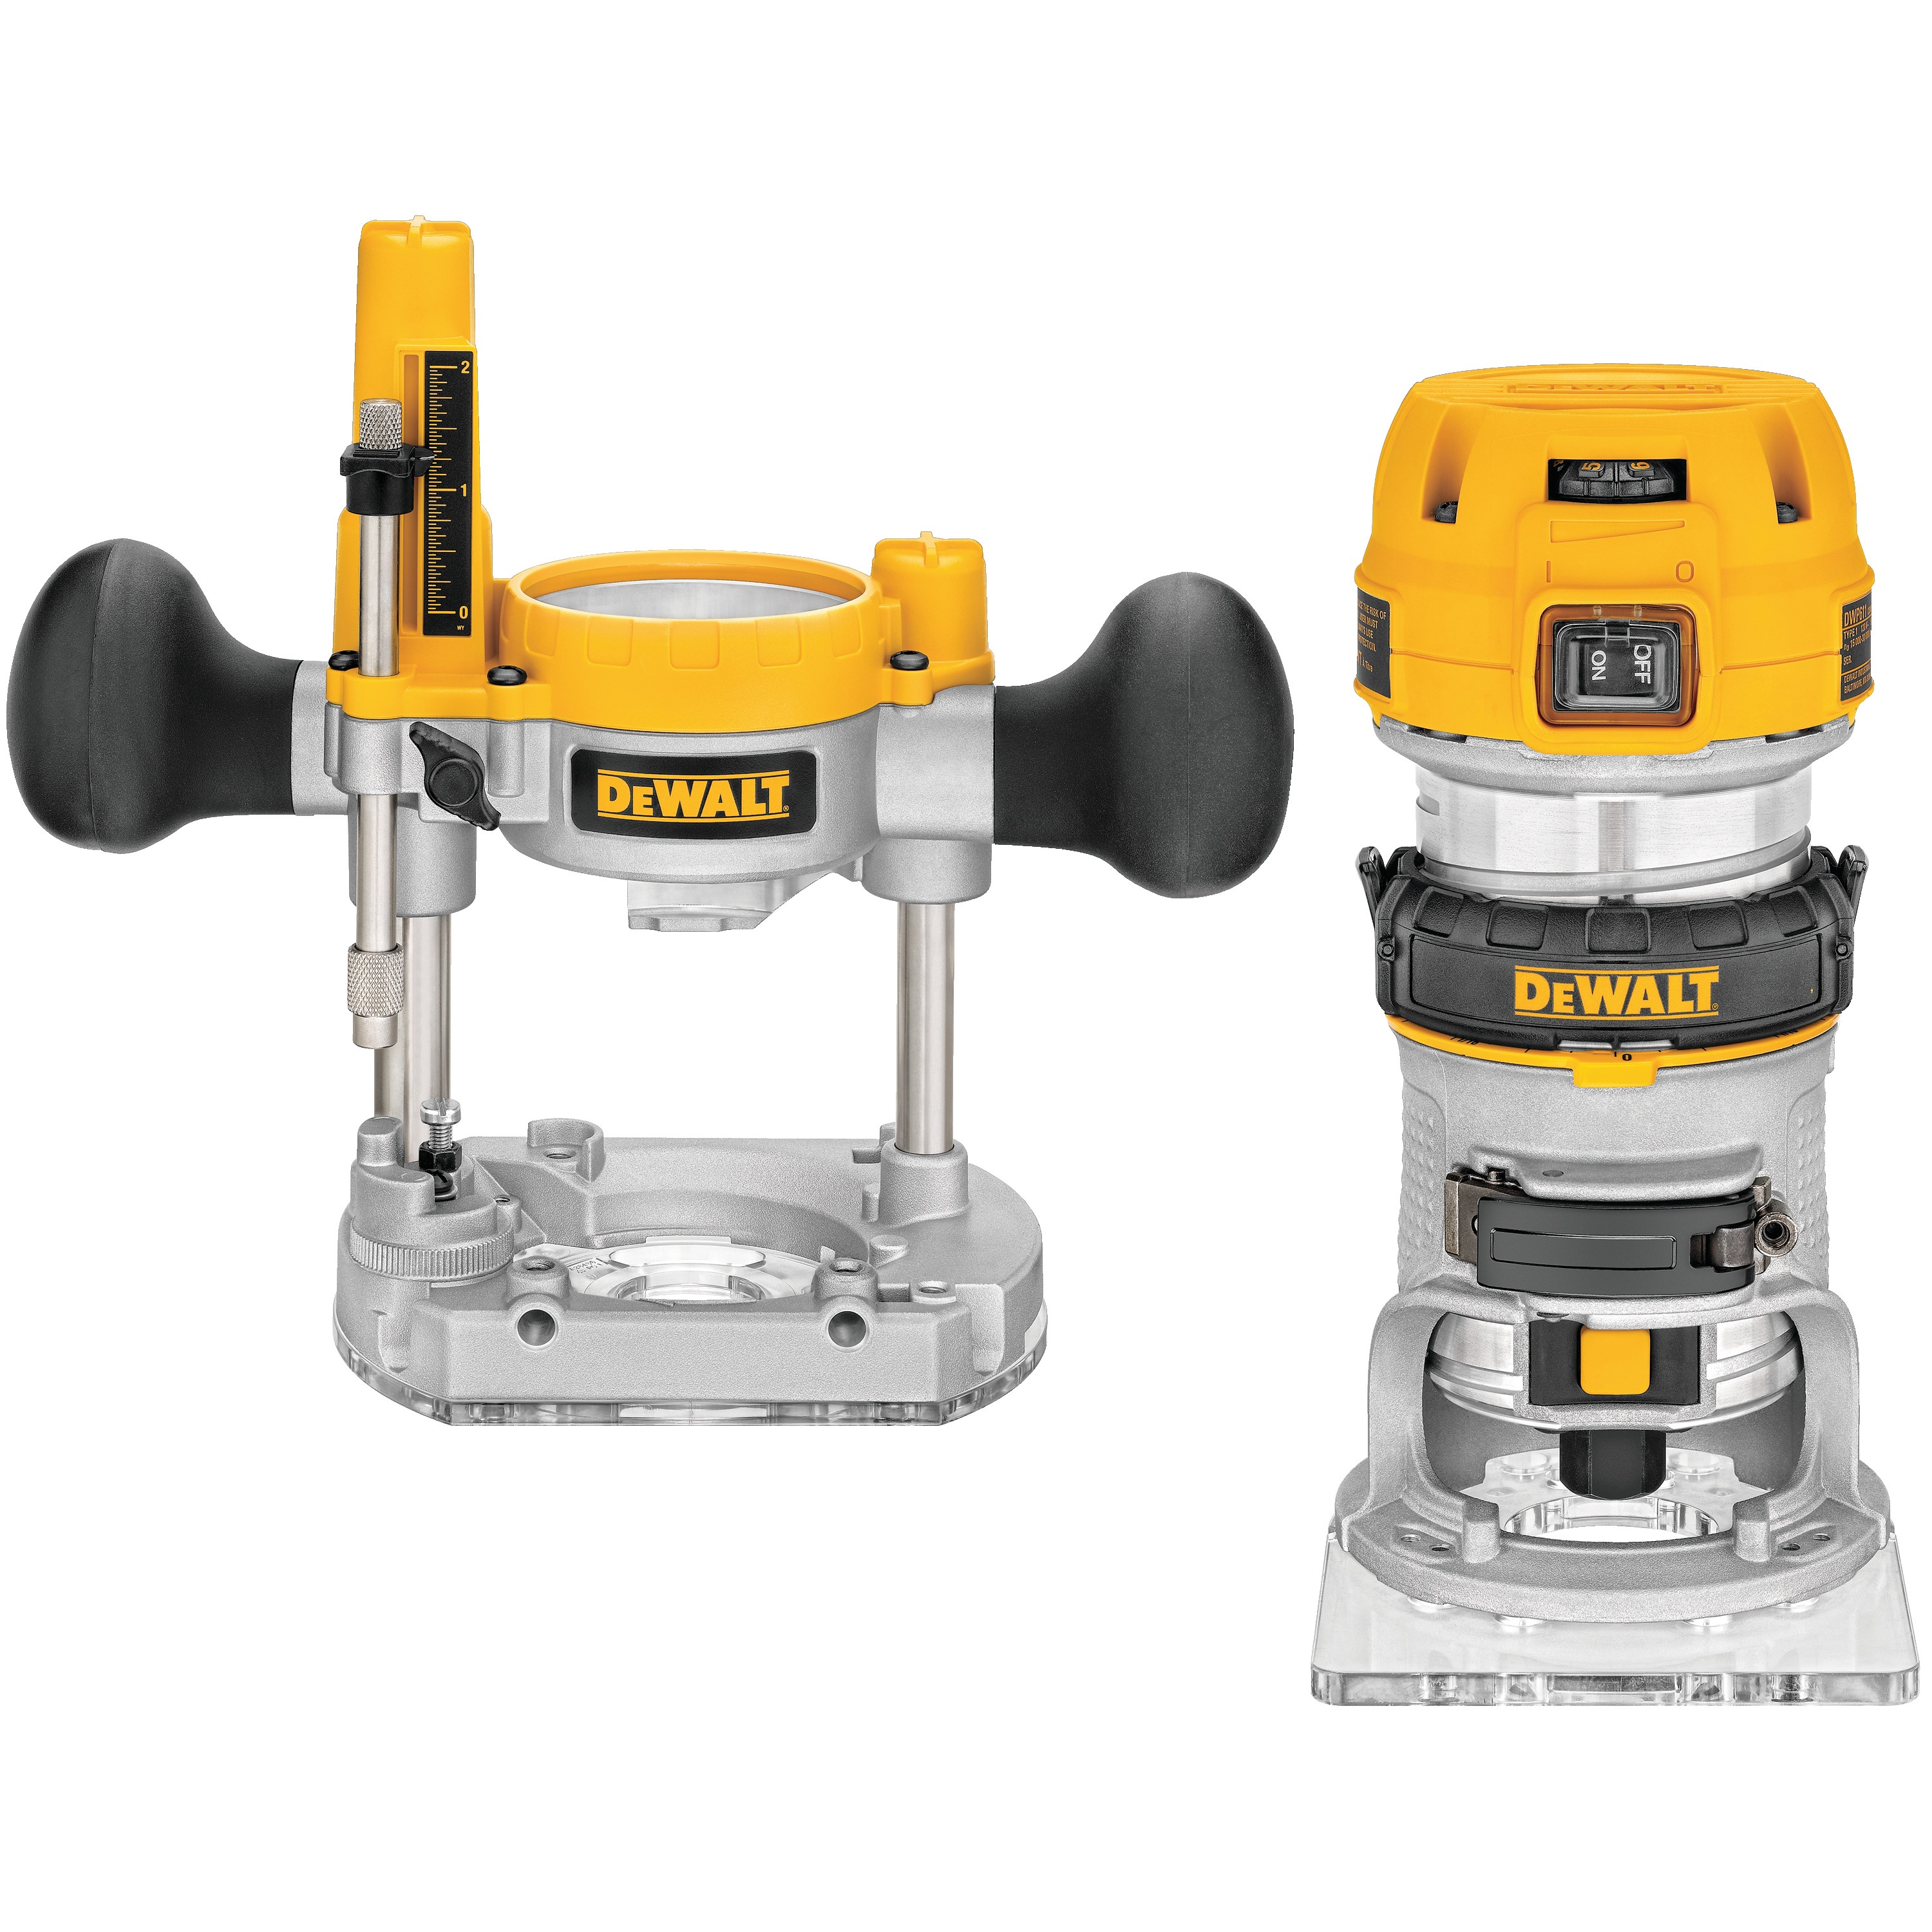 DEWALT - 114 HP Max Torque Variable Speed Compact Router Combo Kit with LEDs - DWP611PK